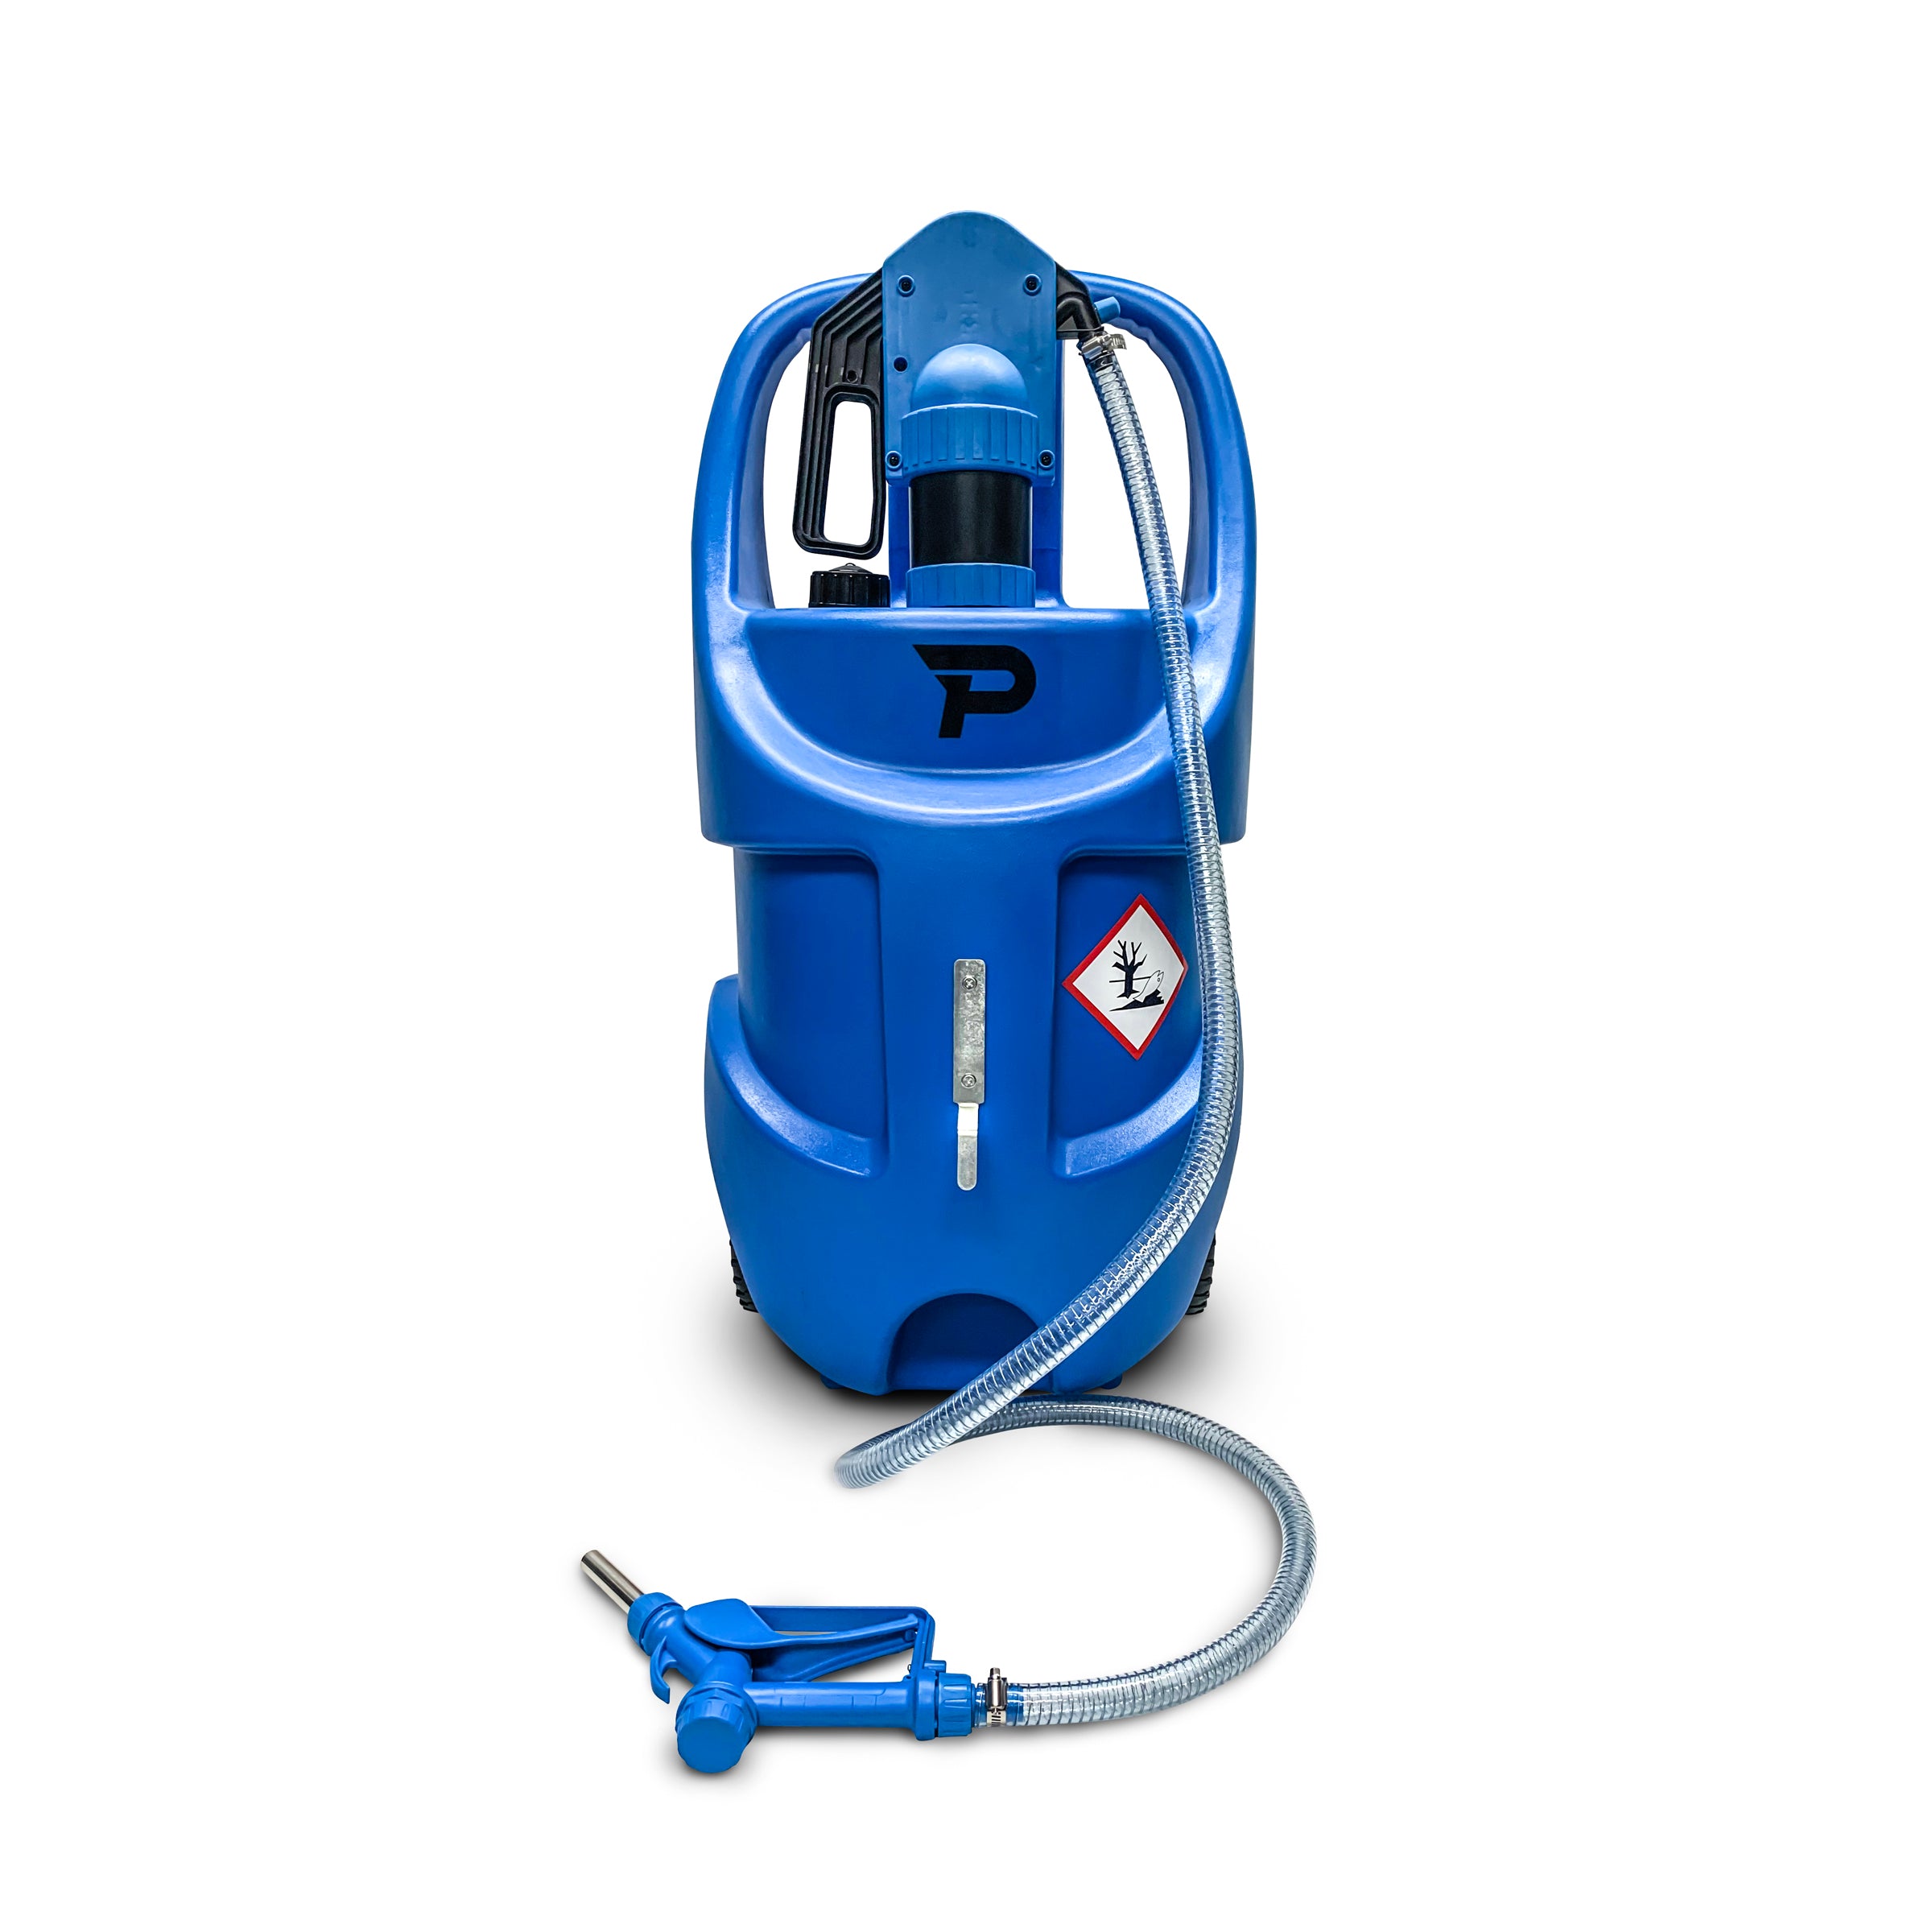 adblue tank with pump mobile on wheels